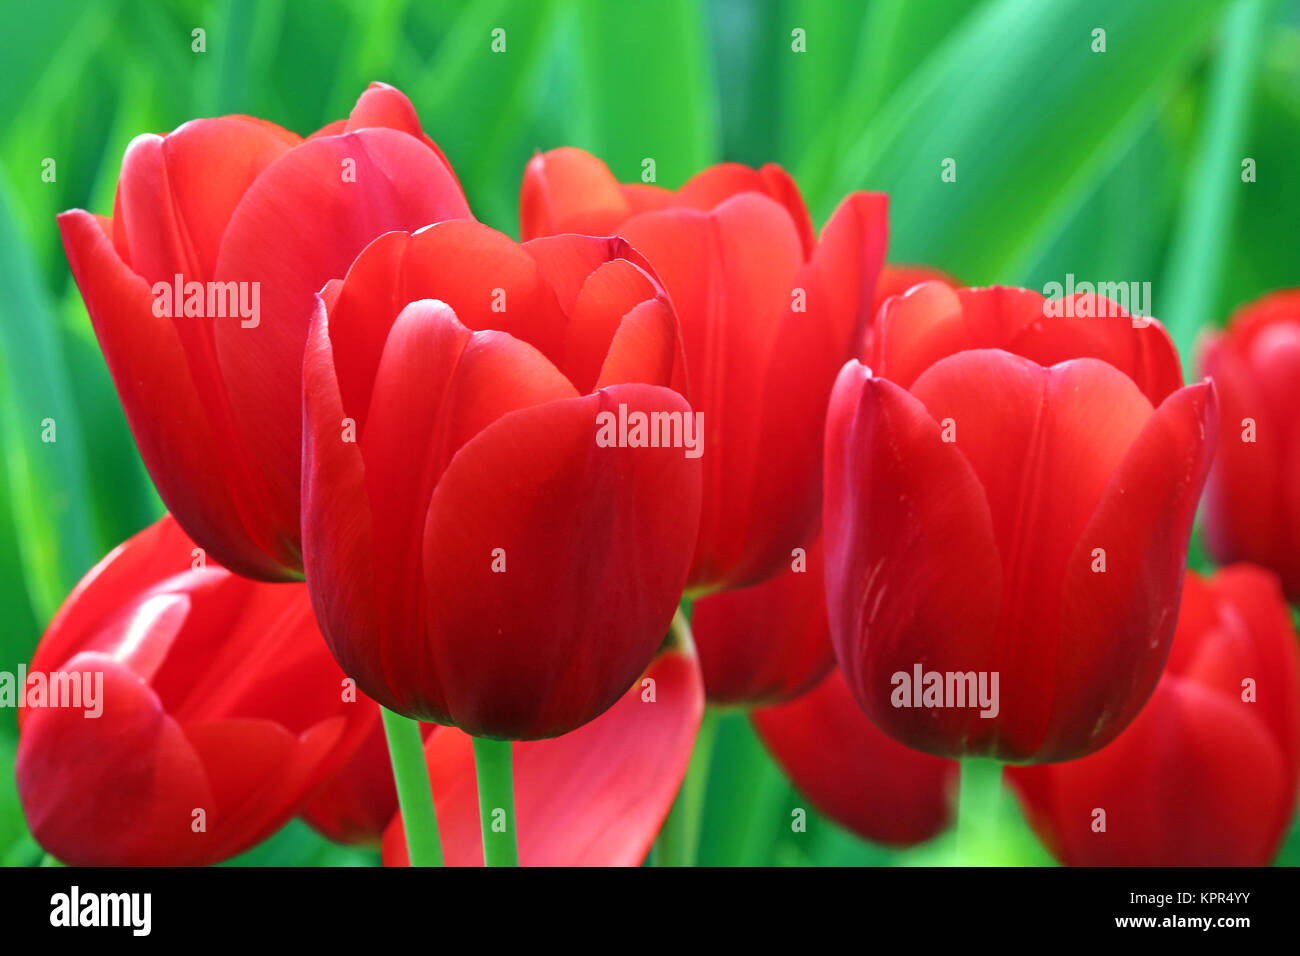 red-green color contrast Stock Photo